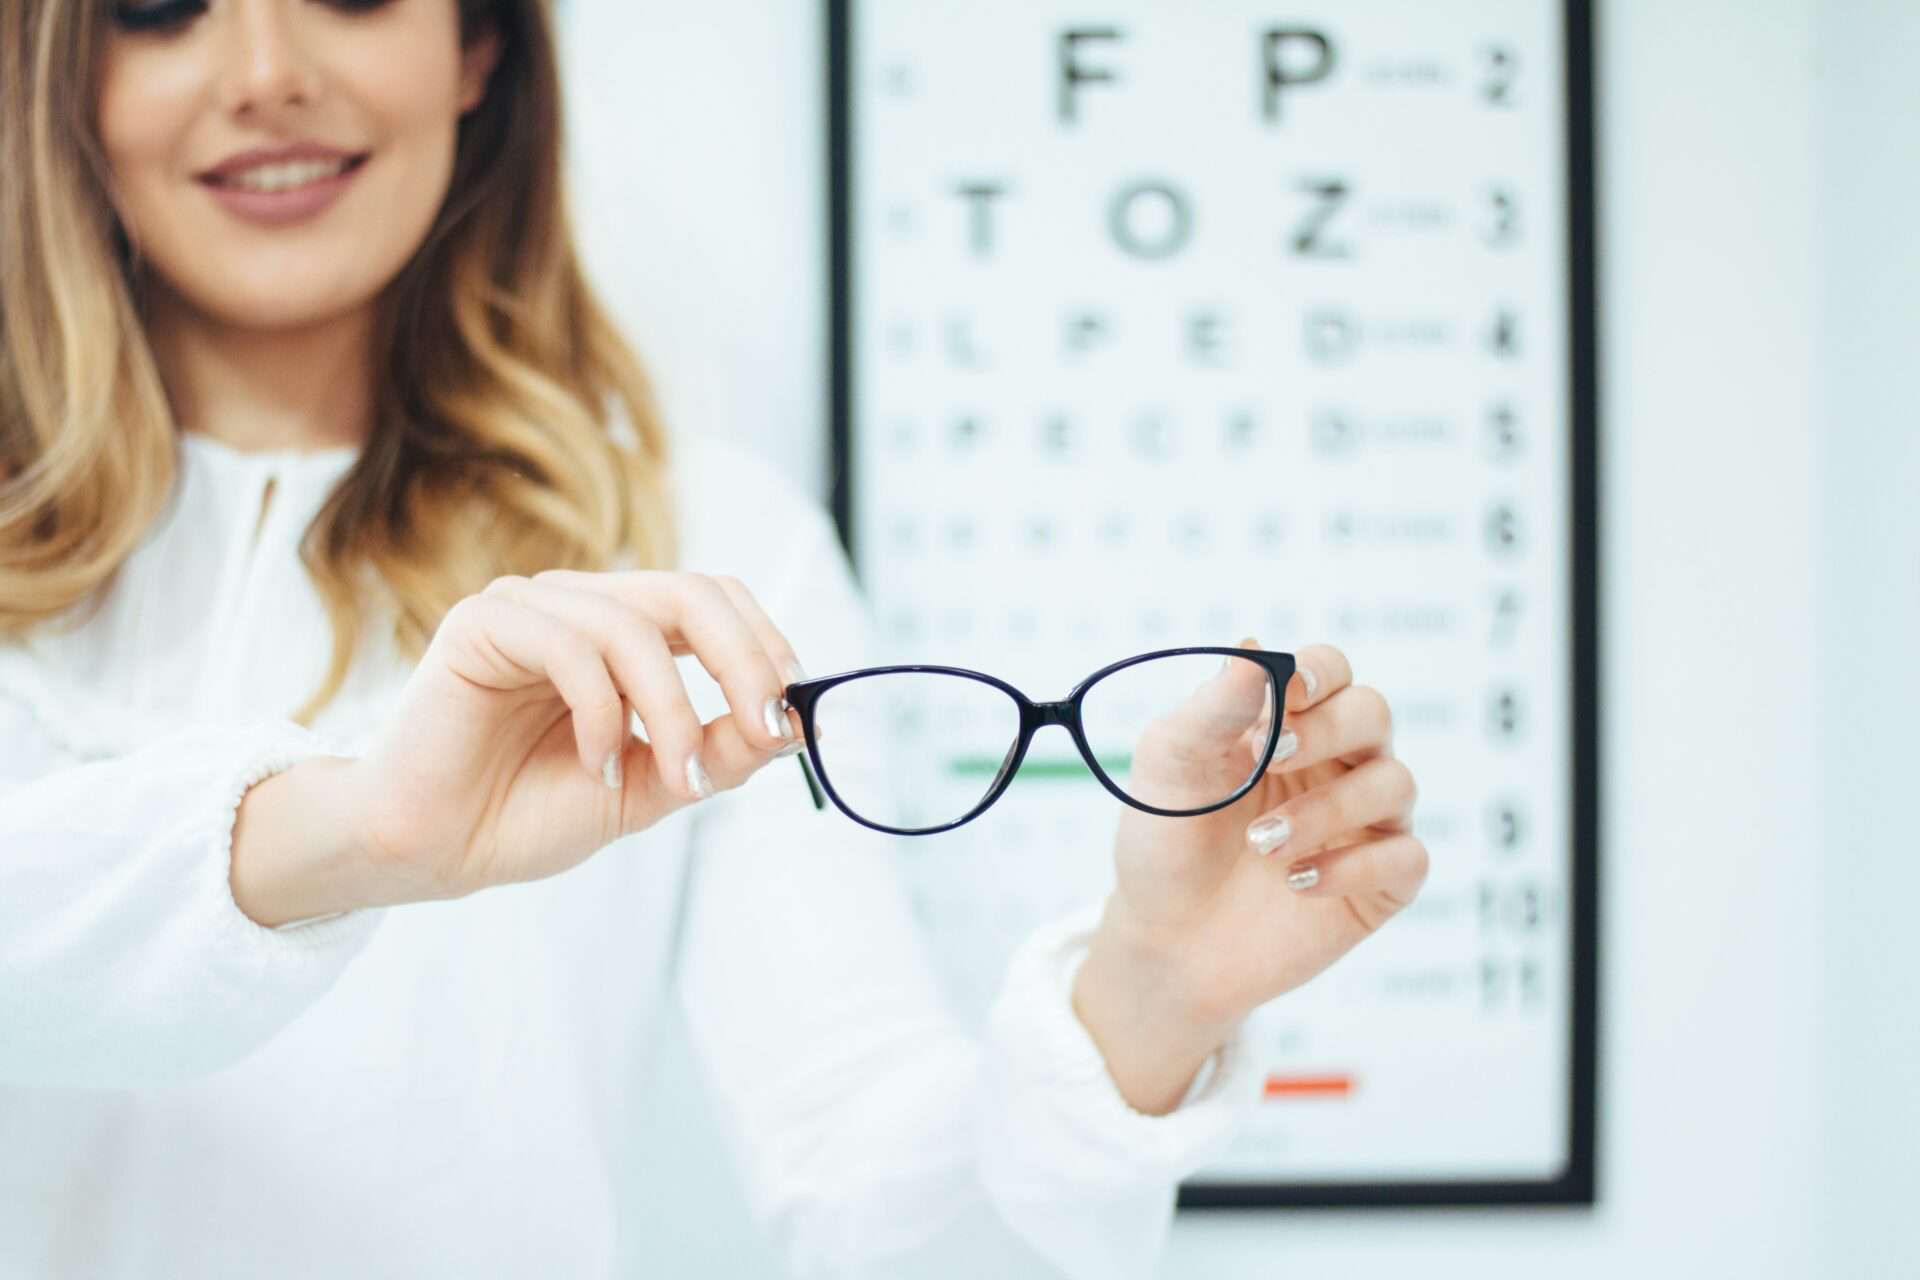 Woman holding a pair of black glasses in front of an eye chart